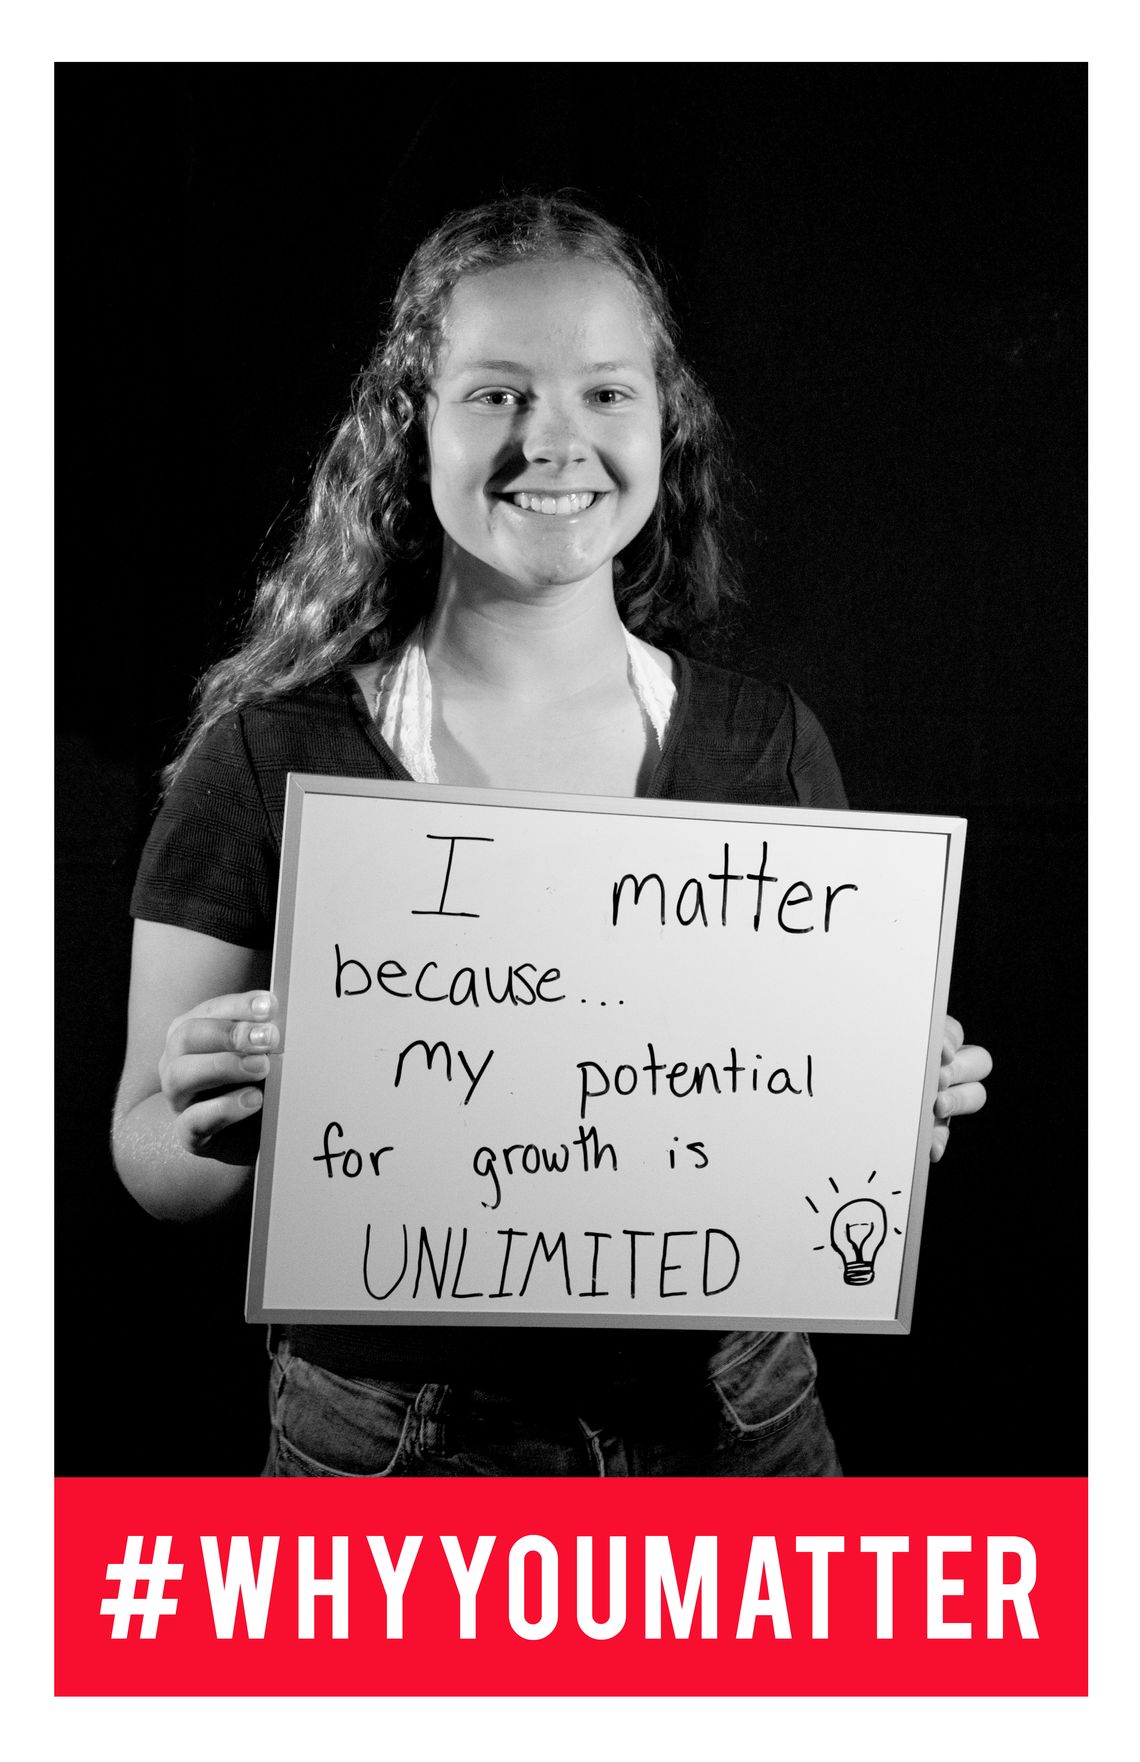 #WhyYouMatter School and Community Campaign